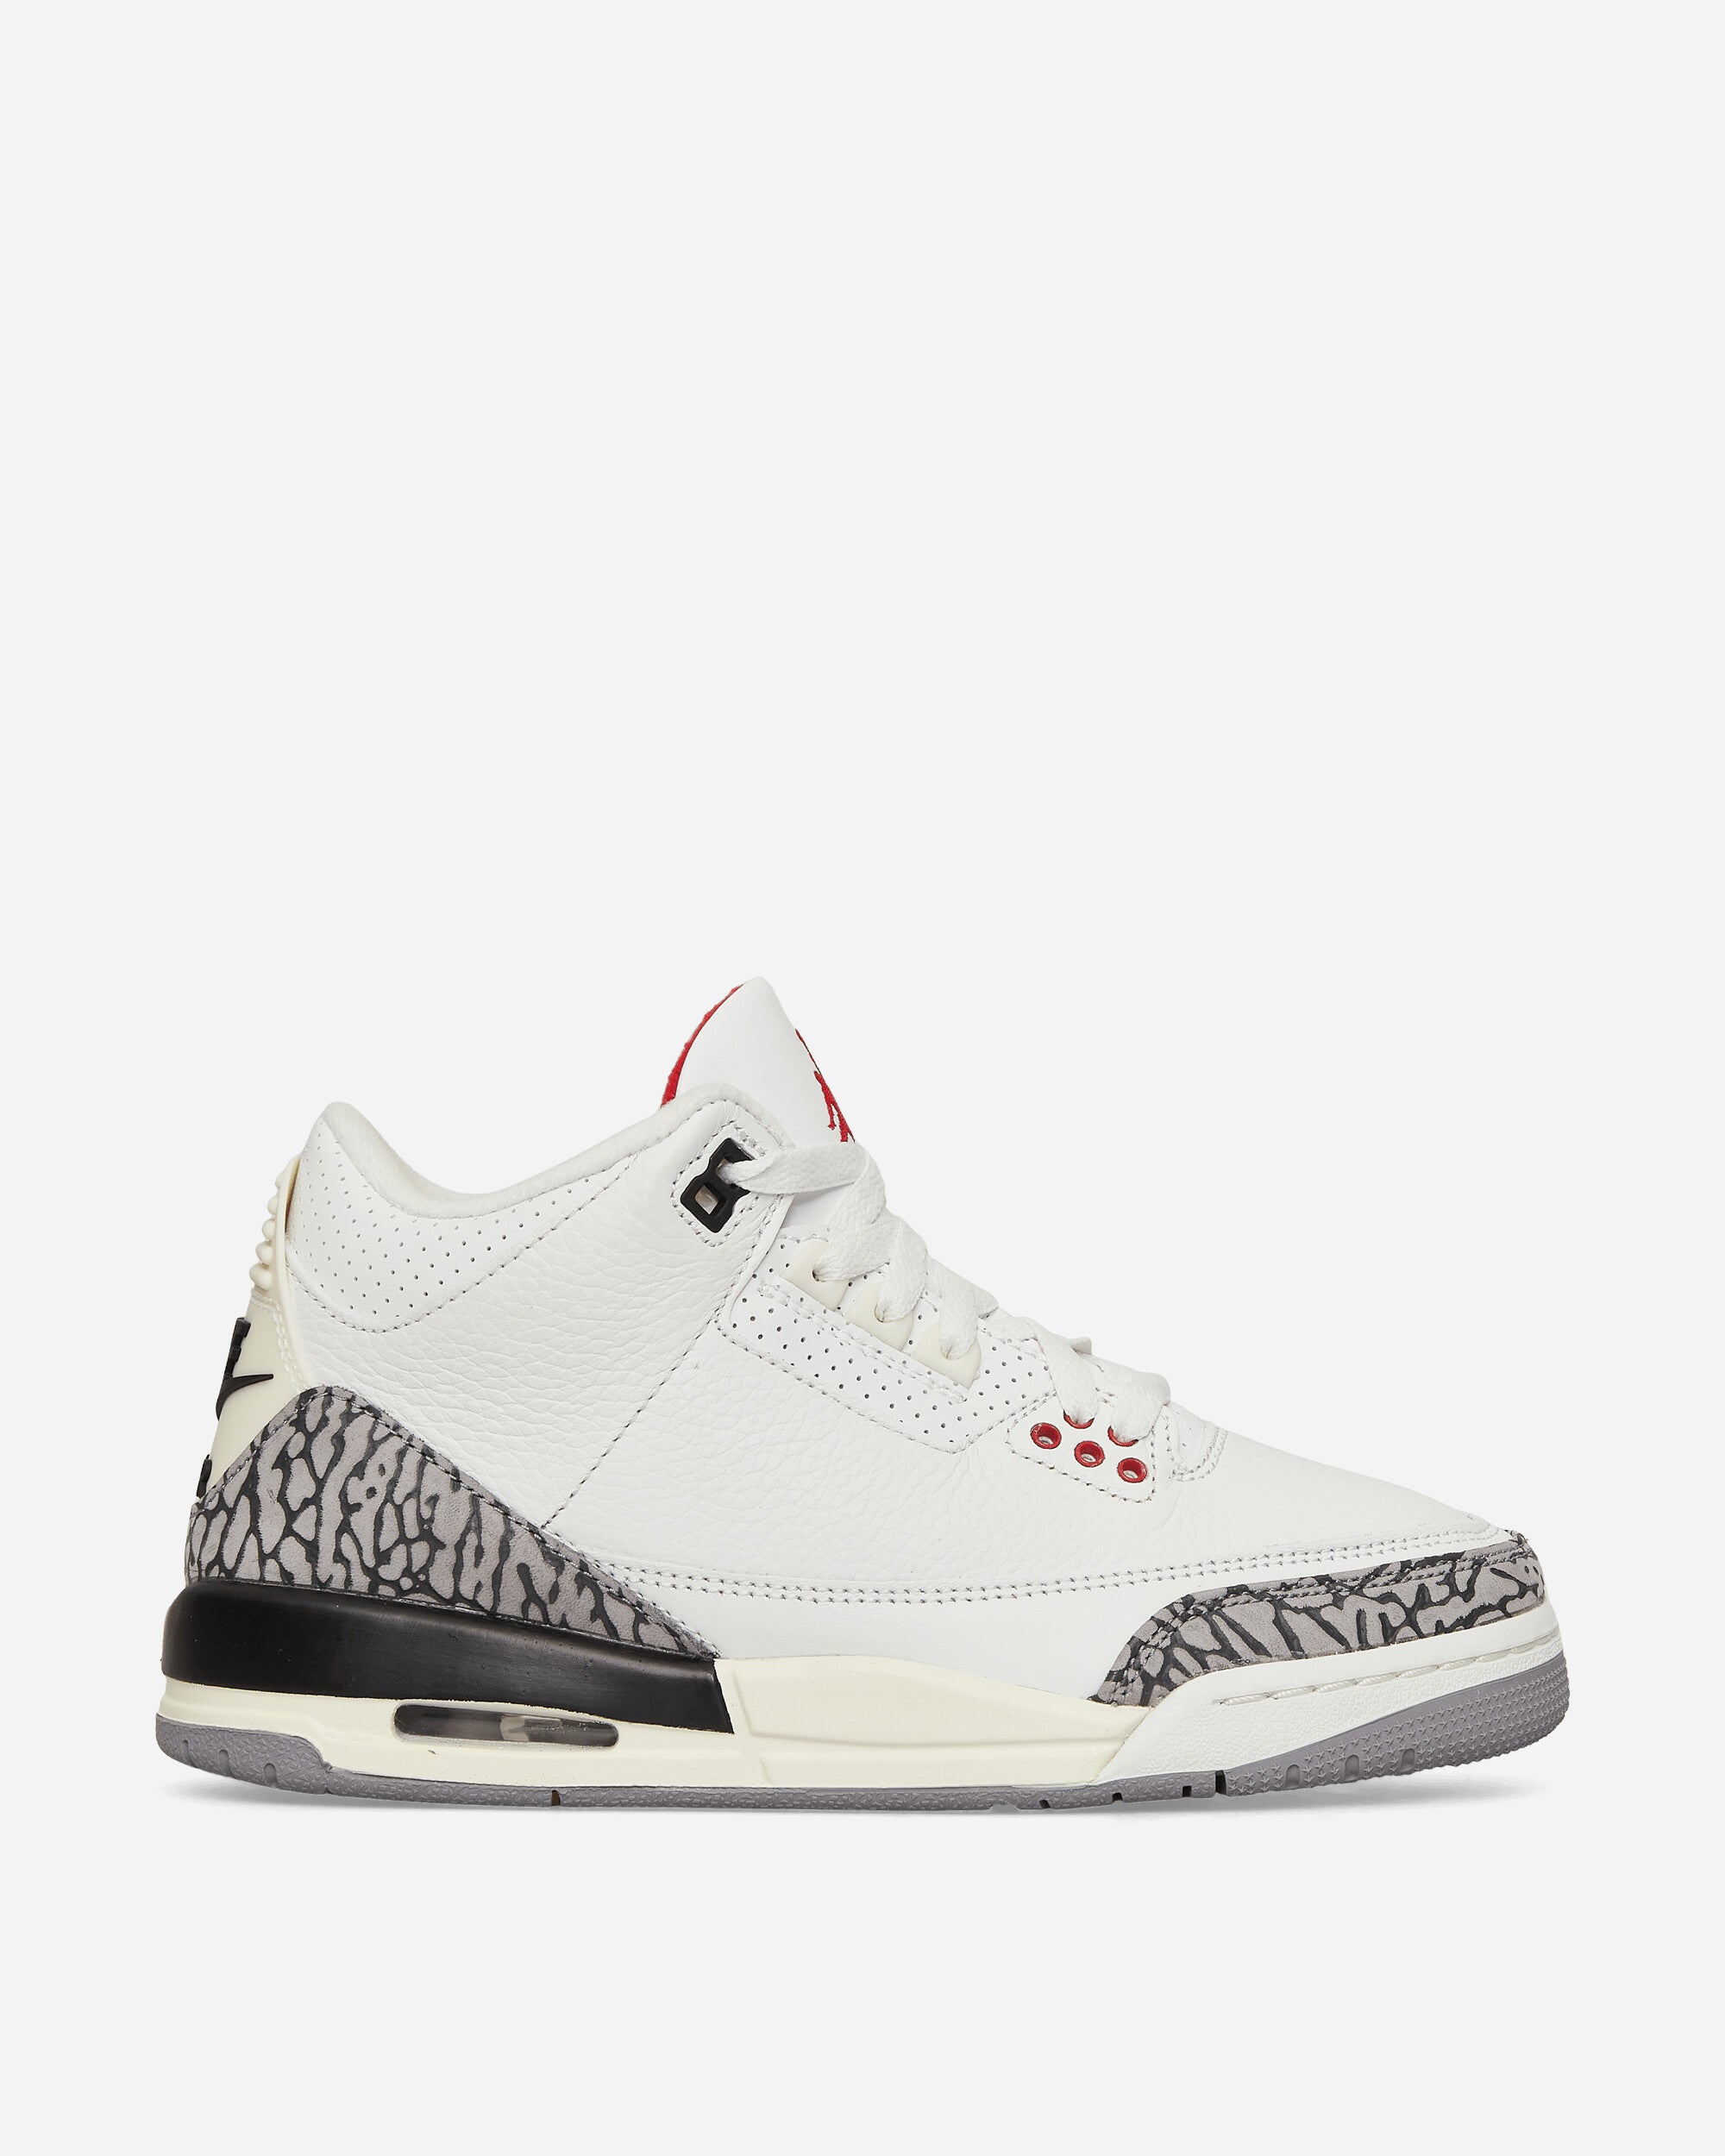 efficiency Stick out Belly Nike Jordan Air Jordan 3 Retro (GS) 'White Cement Reimagined' Sneakers  Summit White